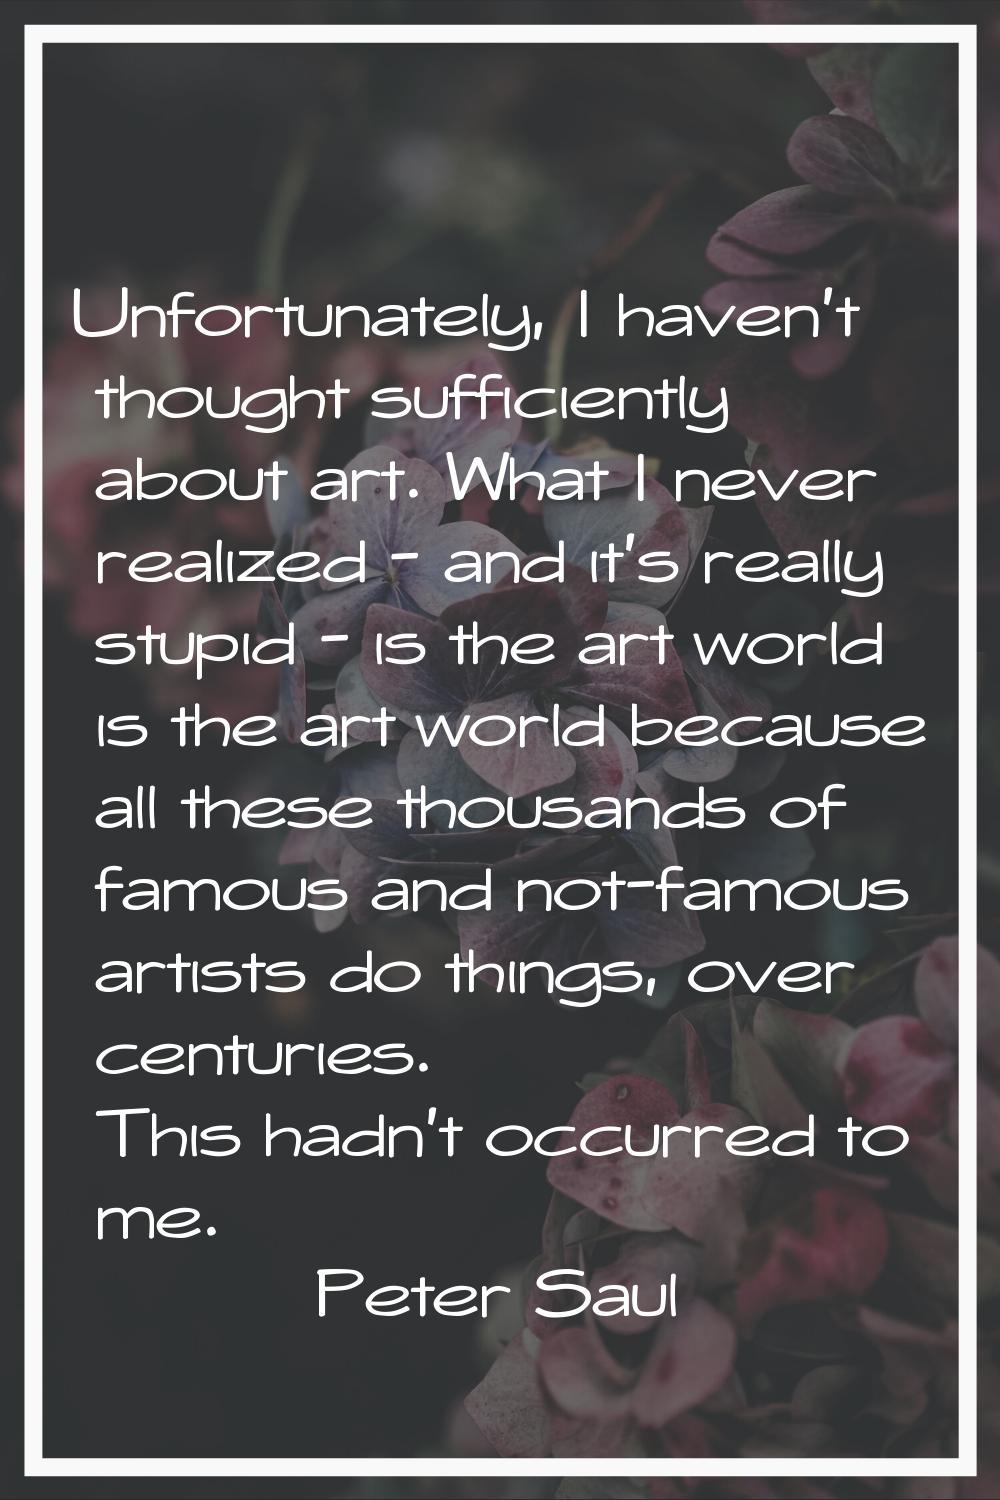 Unfortunately, I haven't thought sufficiently about art. What I never realized - and it's really st